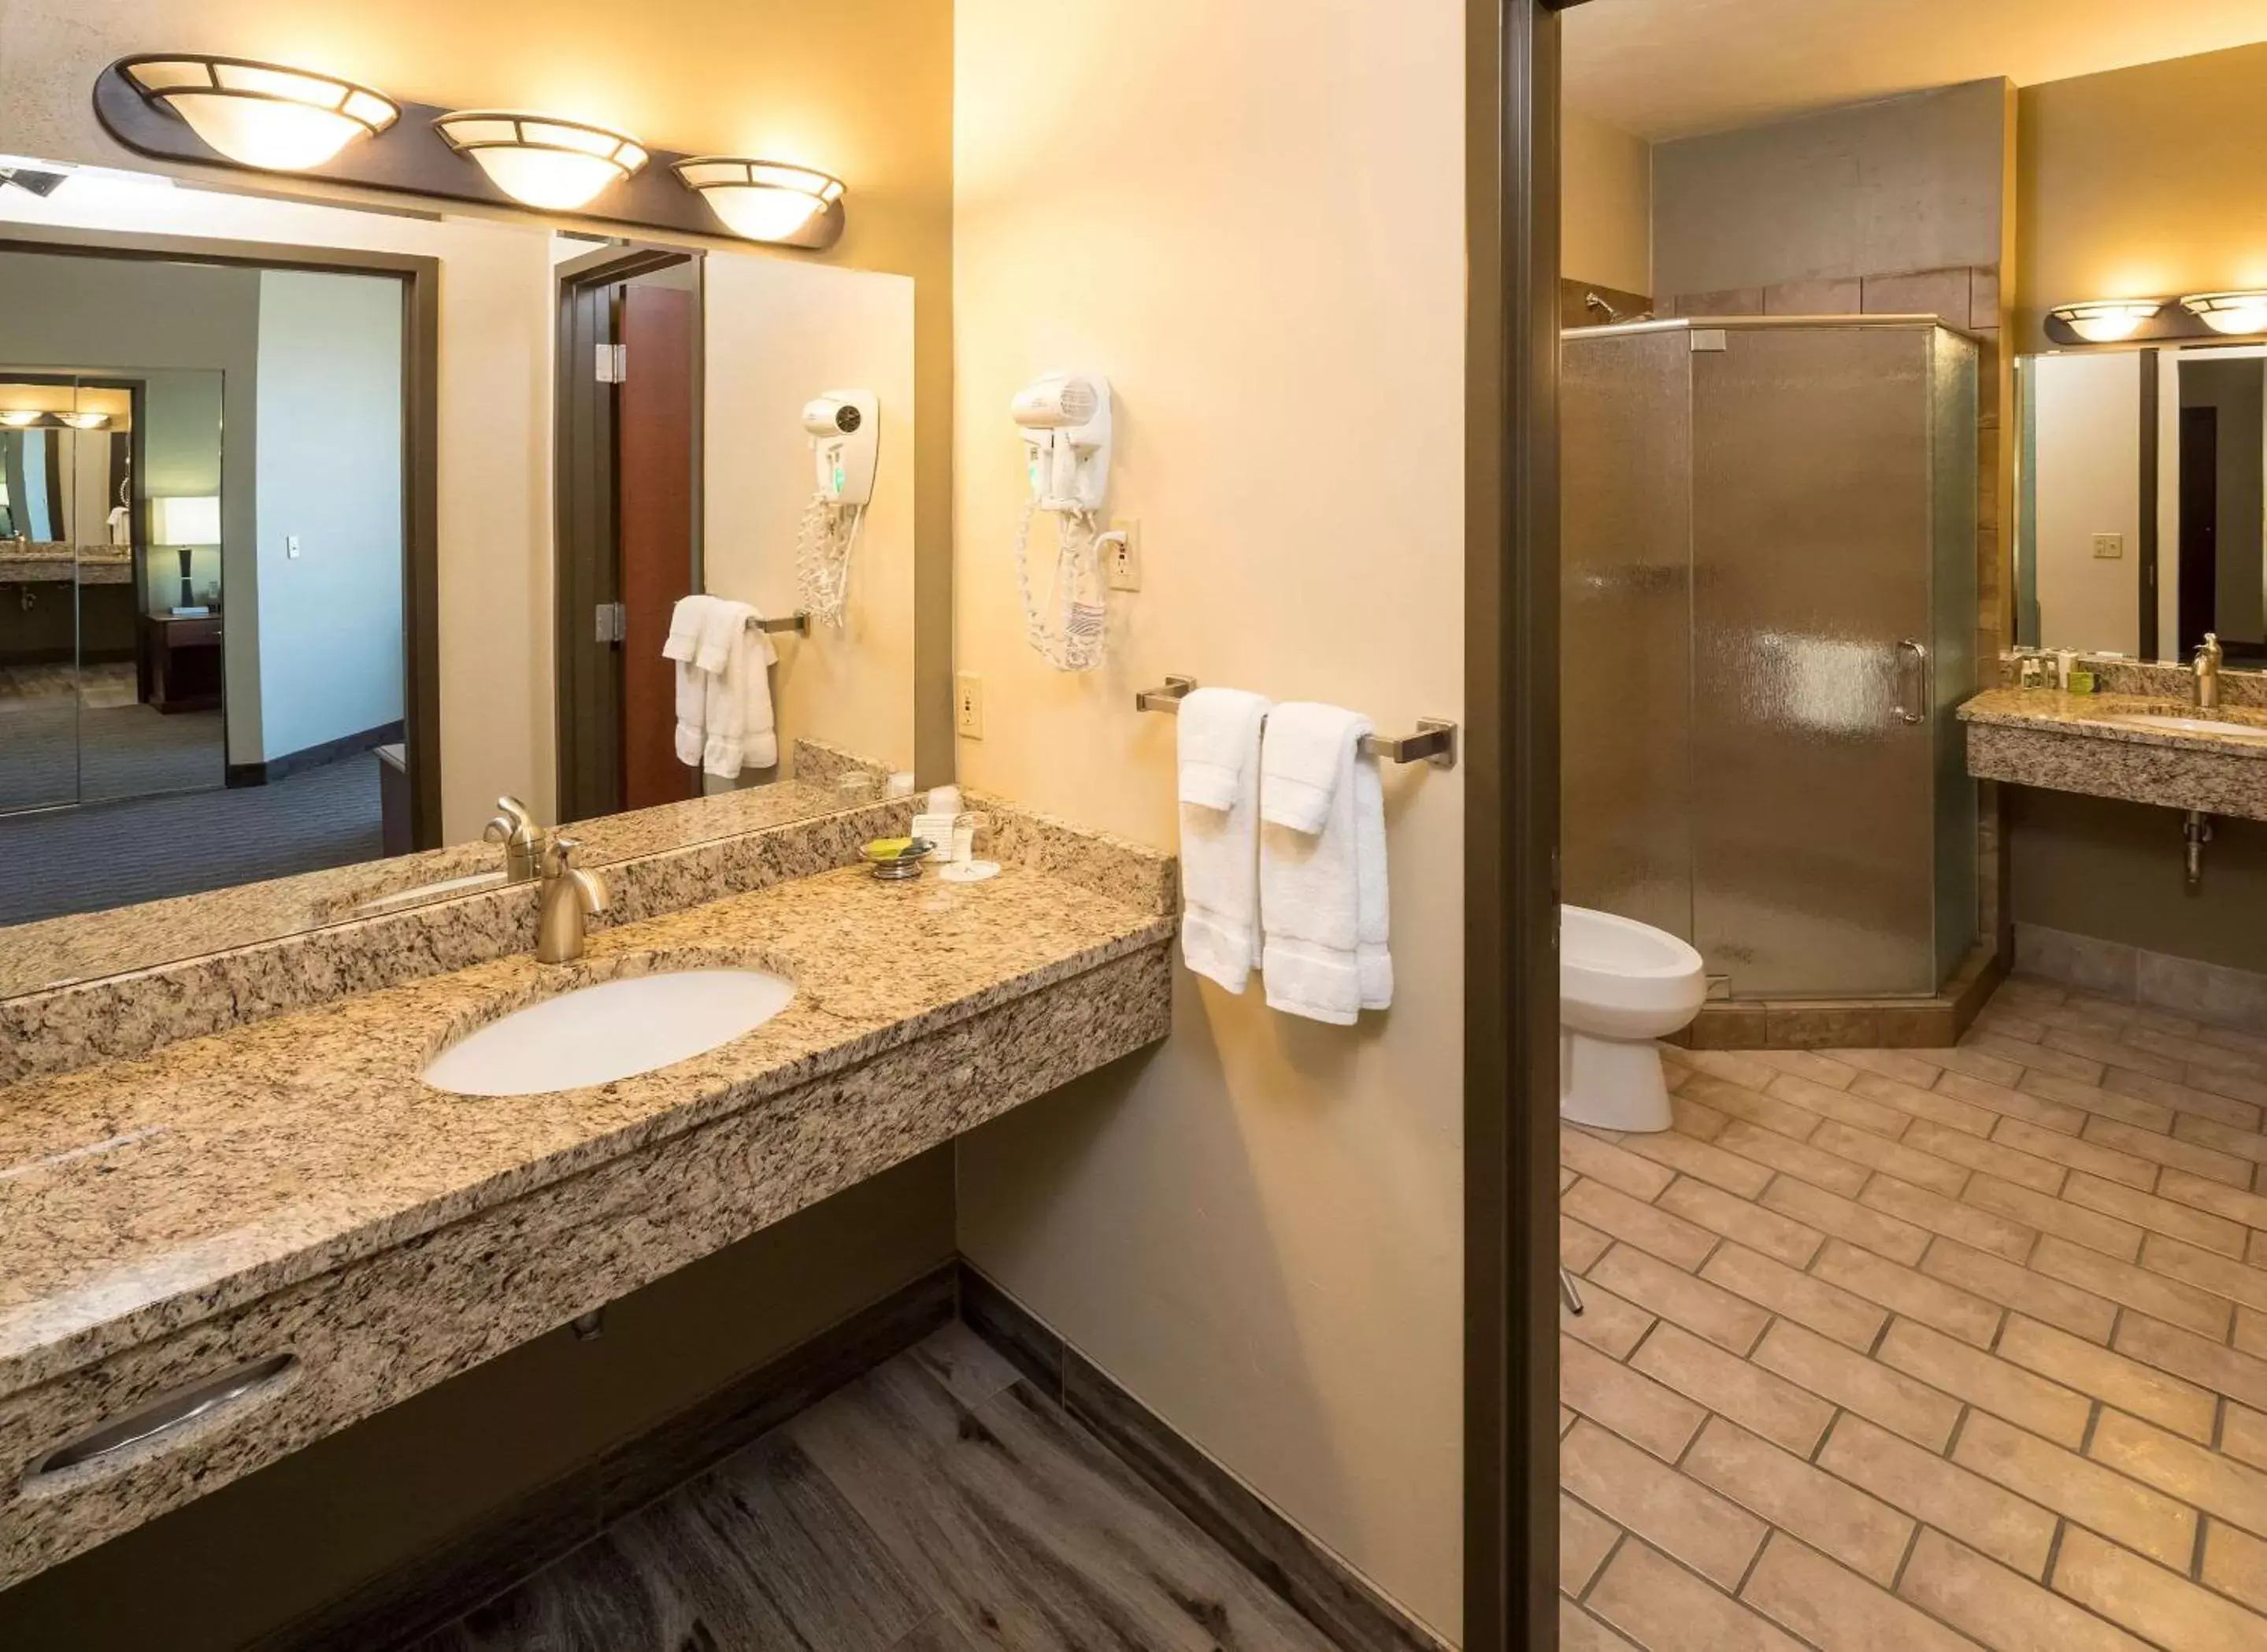 Bathroom in Kress Inn, Ascend Hotel Collection